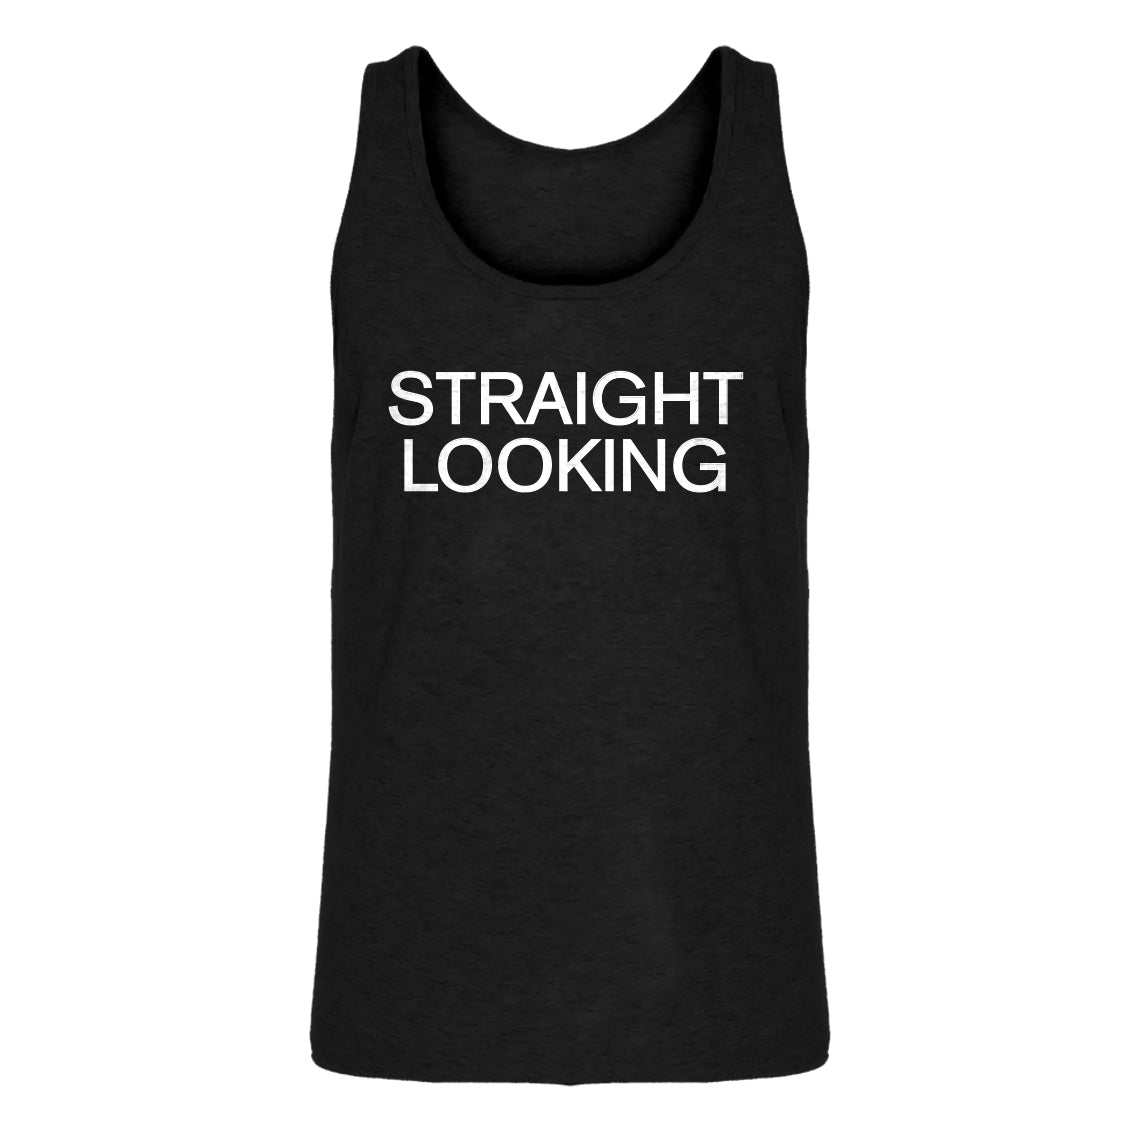 Mens Straight Looking Jersey Tank Top